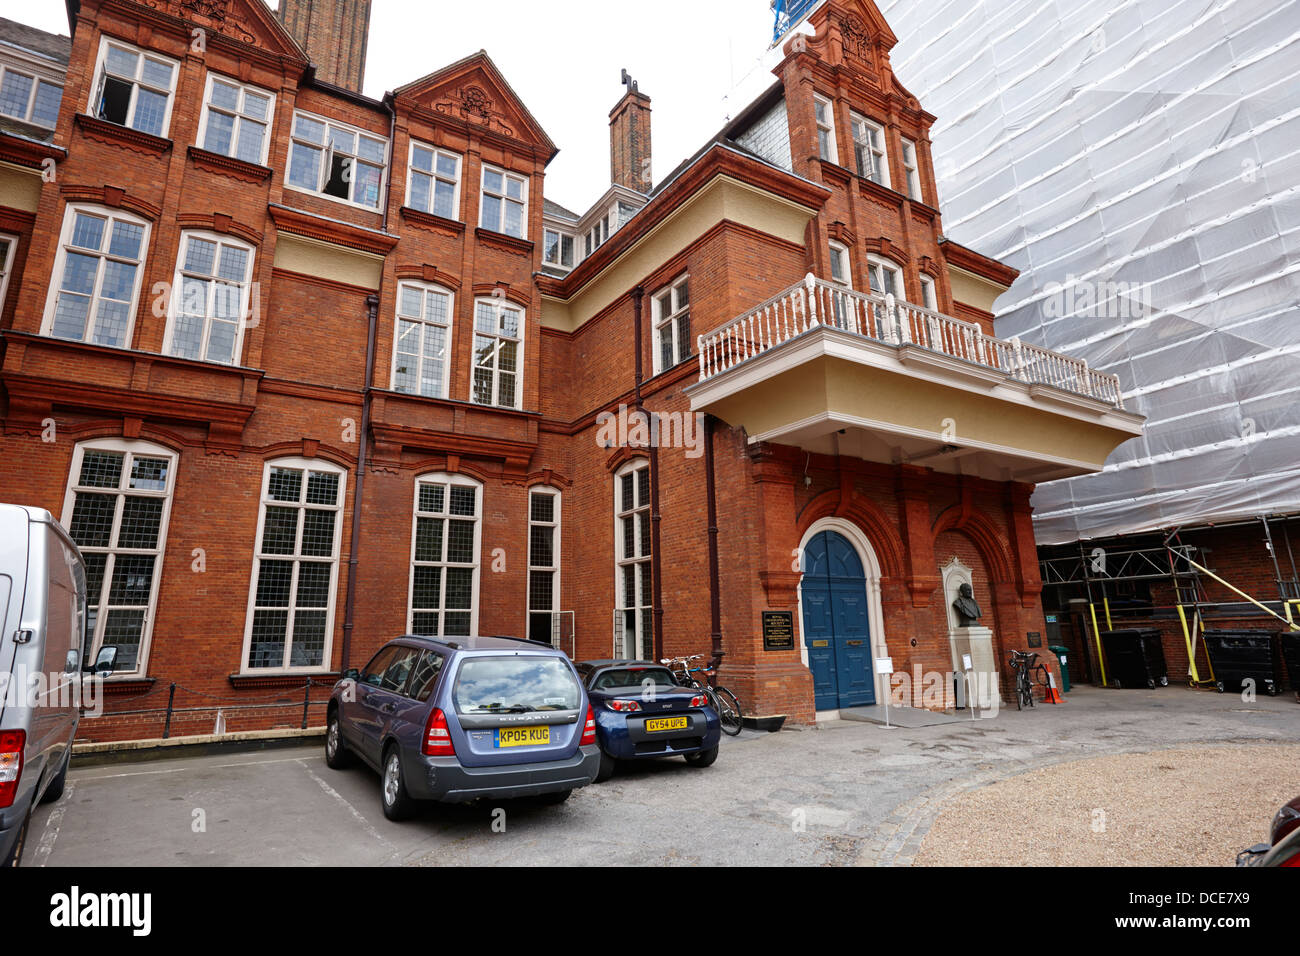 lowther lodge the royal geographical society London England UK Stock Photo